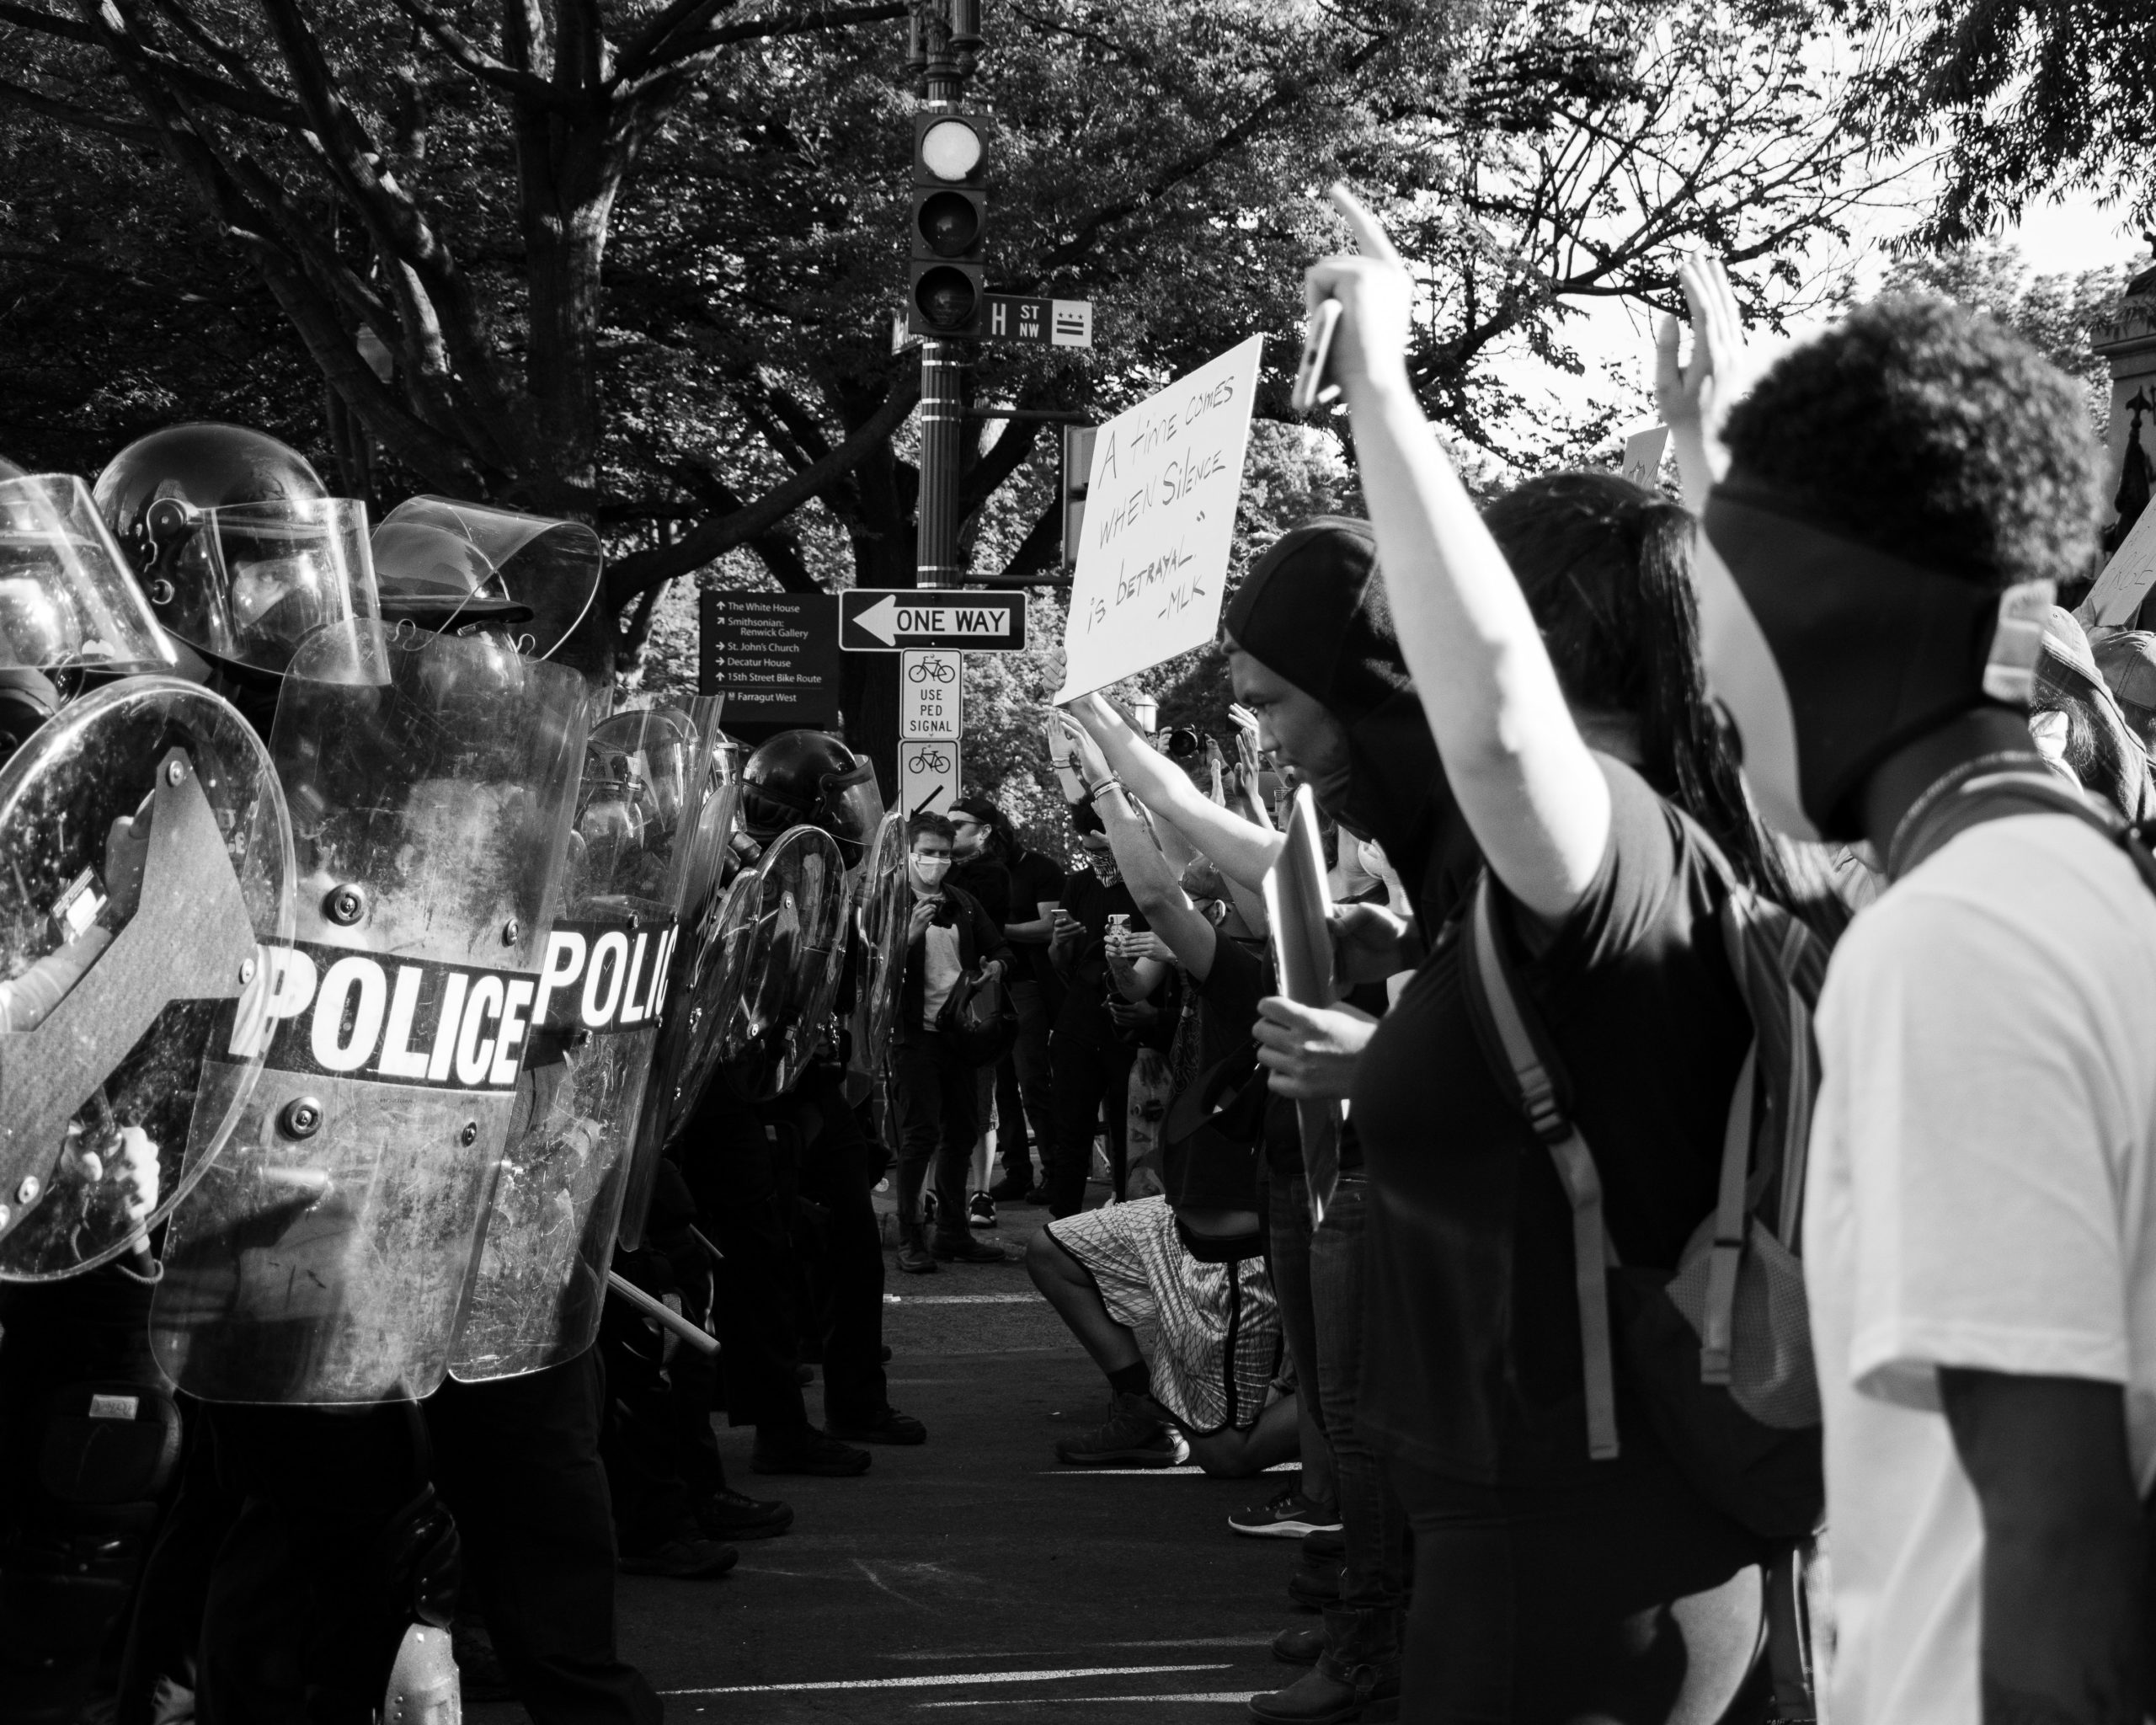 To the left of the black and white image, there is a row of police in gear and facing across from them, there is a row of protesters with signs.